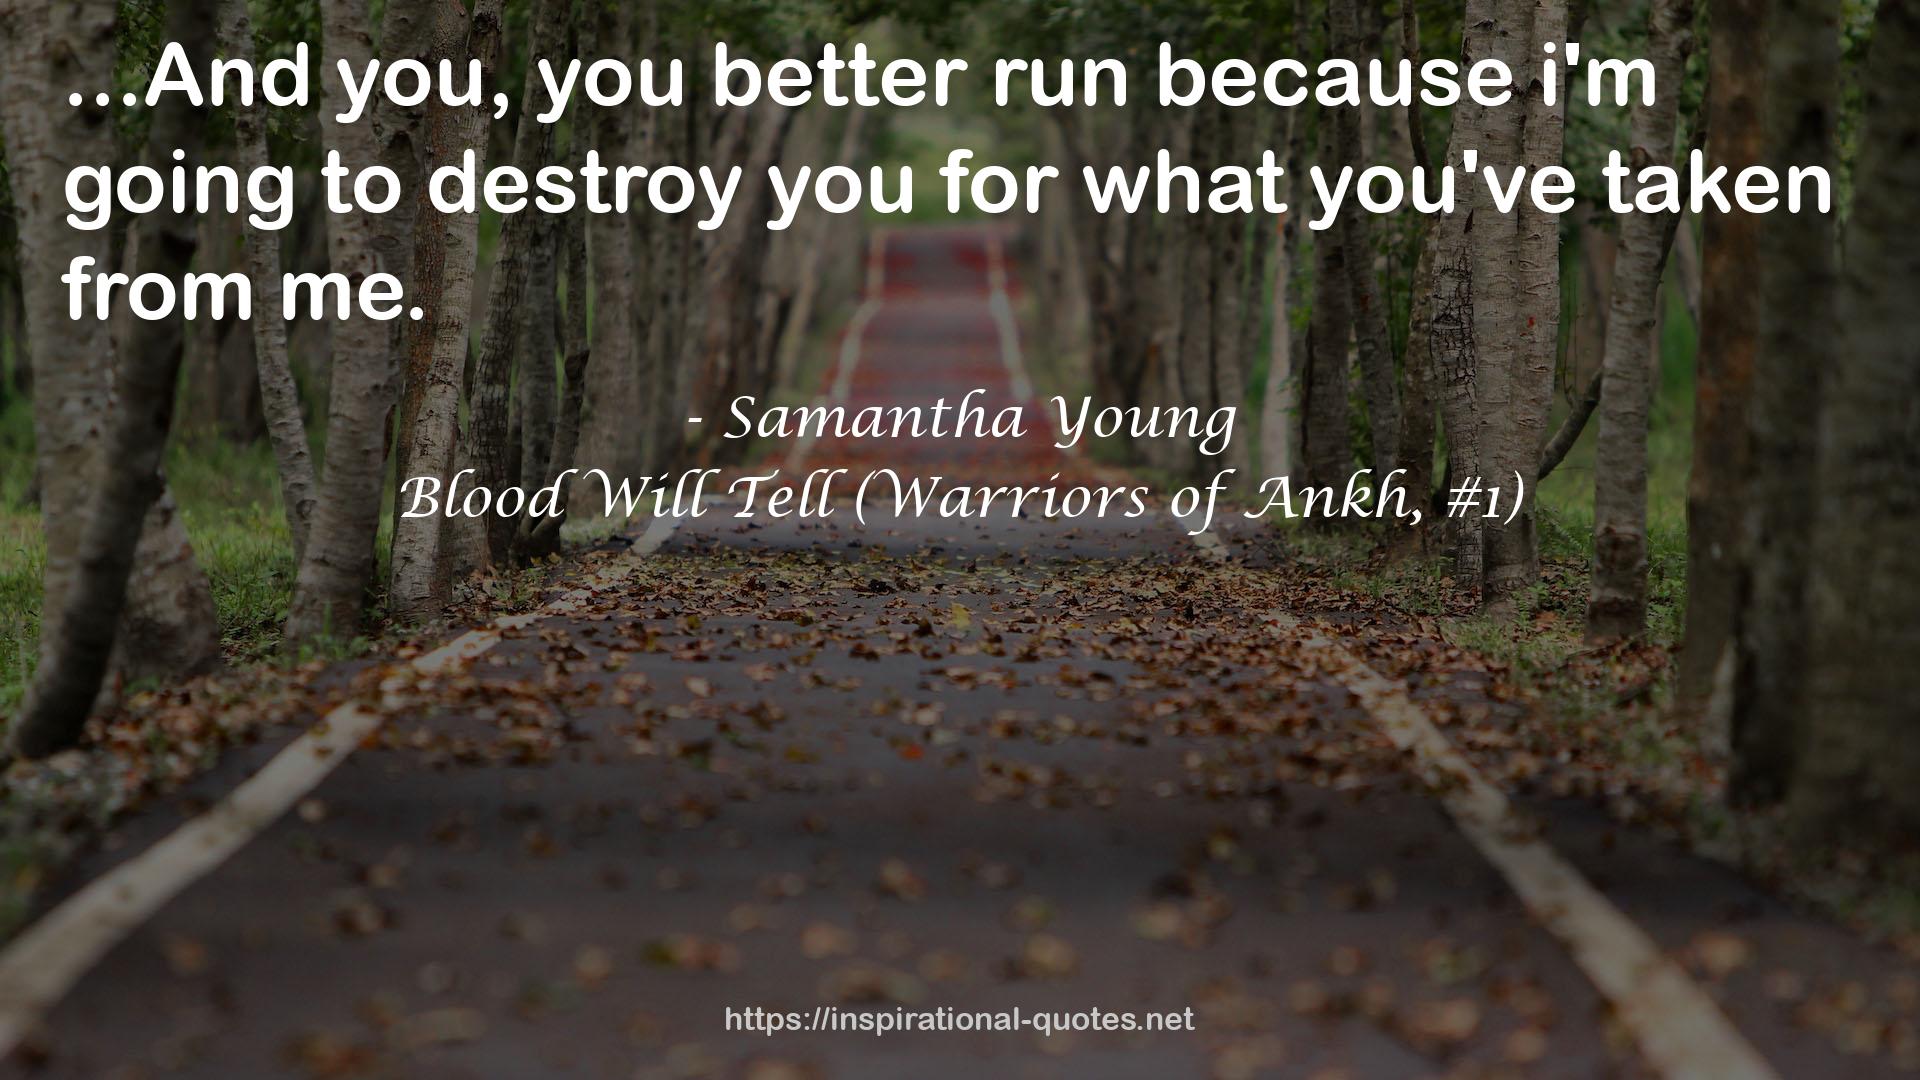 Blood Will Tell (Warriors of Ankh, #1) QUOTES